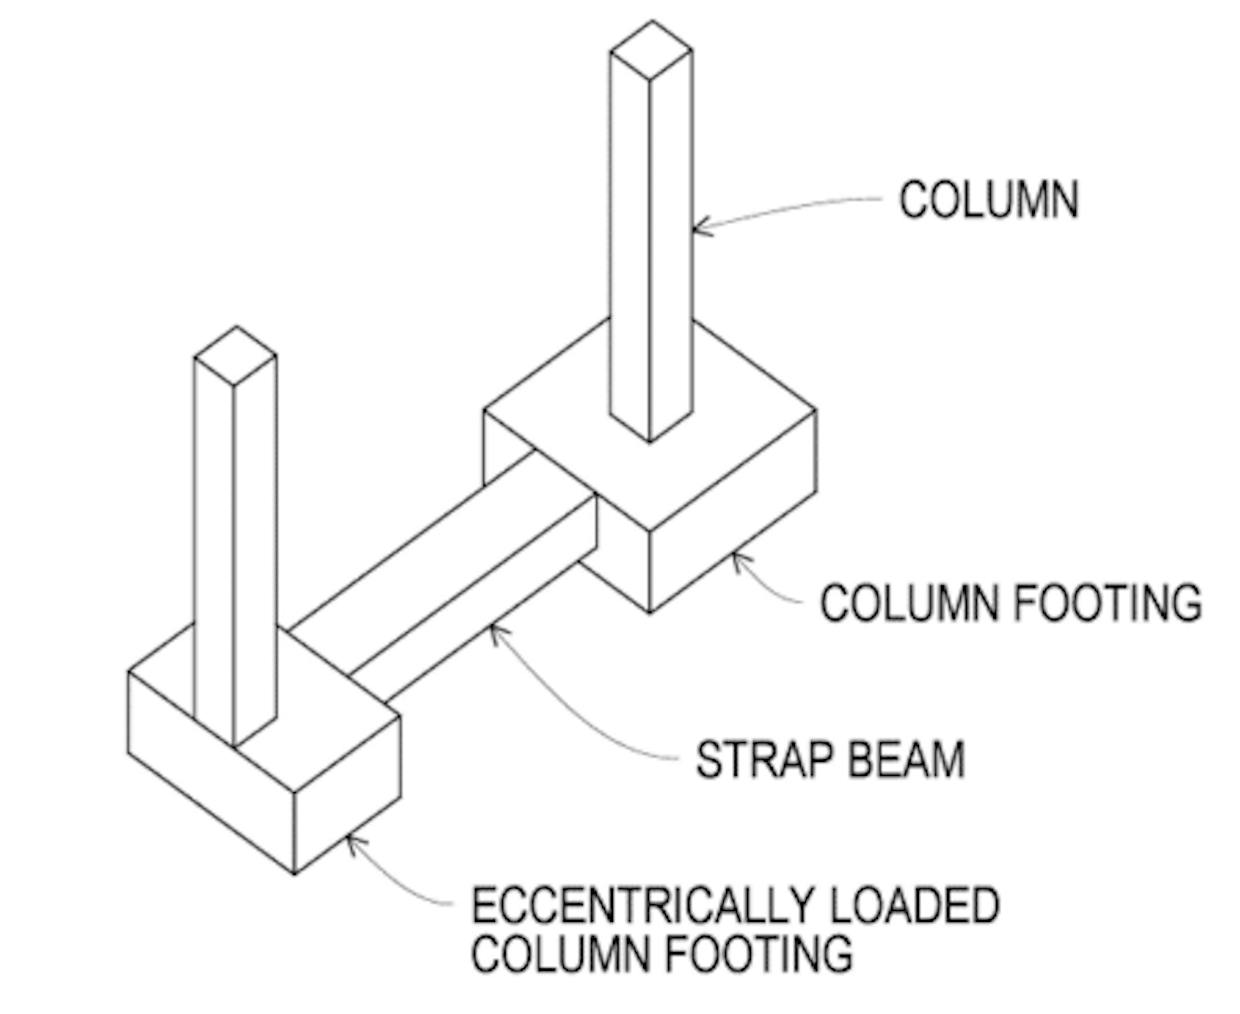 What is diffrent between strap footing and wall footing?